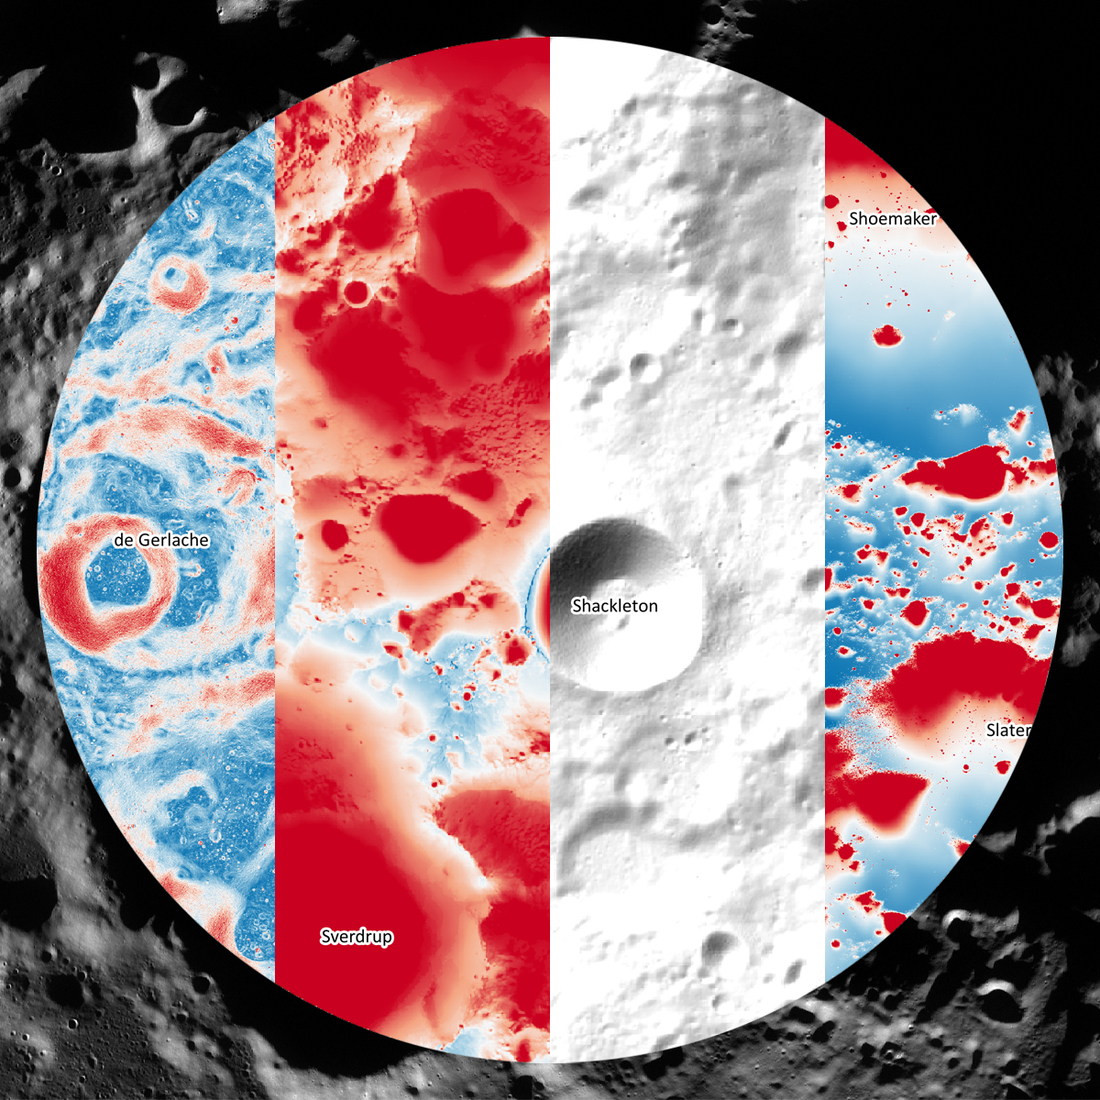 Picture of 4 different lunar maps using LROC data